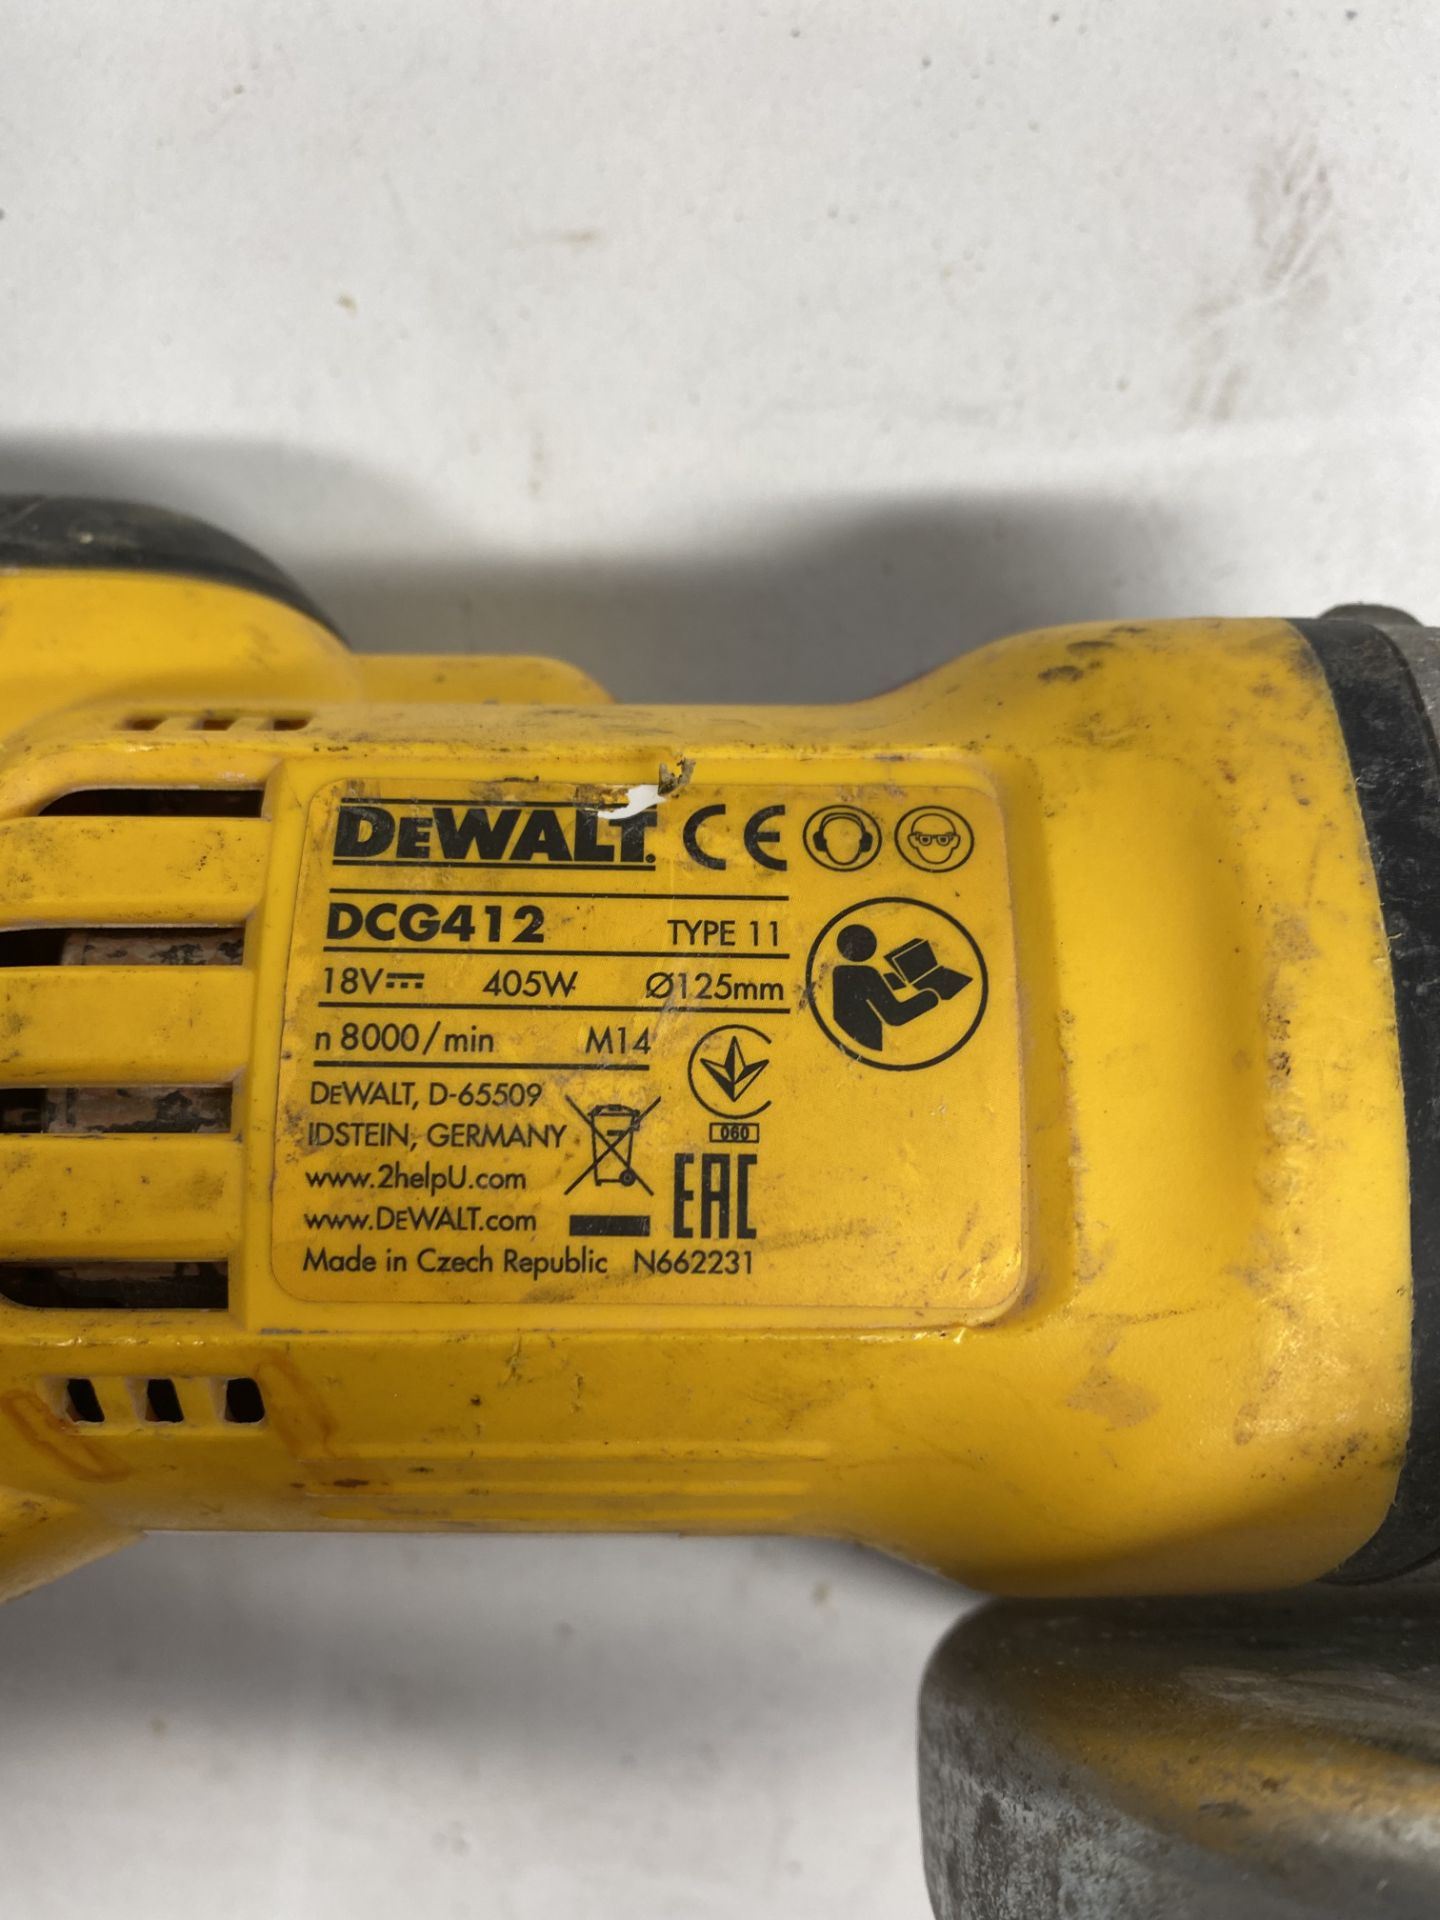 6 x Various DeWalt Power tools With Carry Case & 2 x DeWalt Battery Chargers - Image 10 of 24